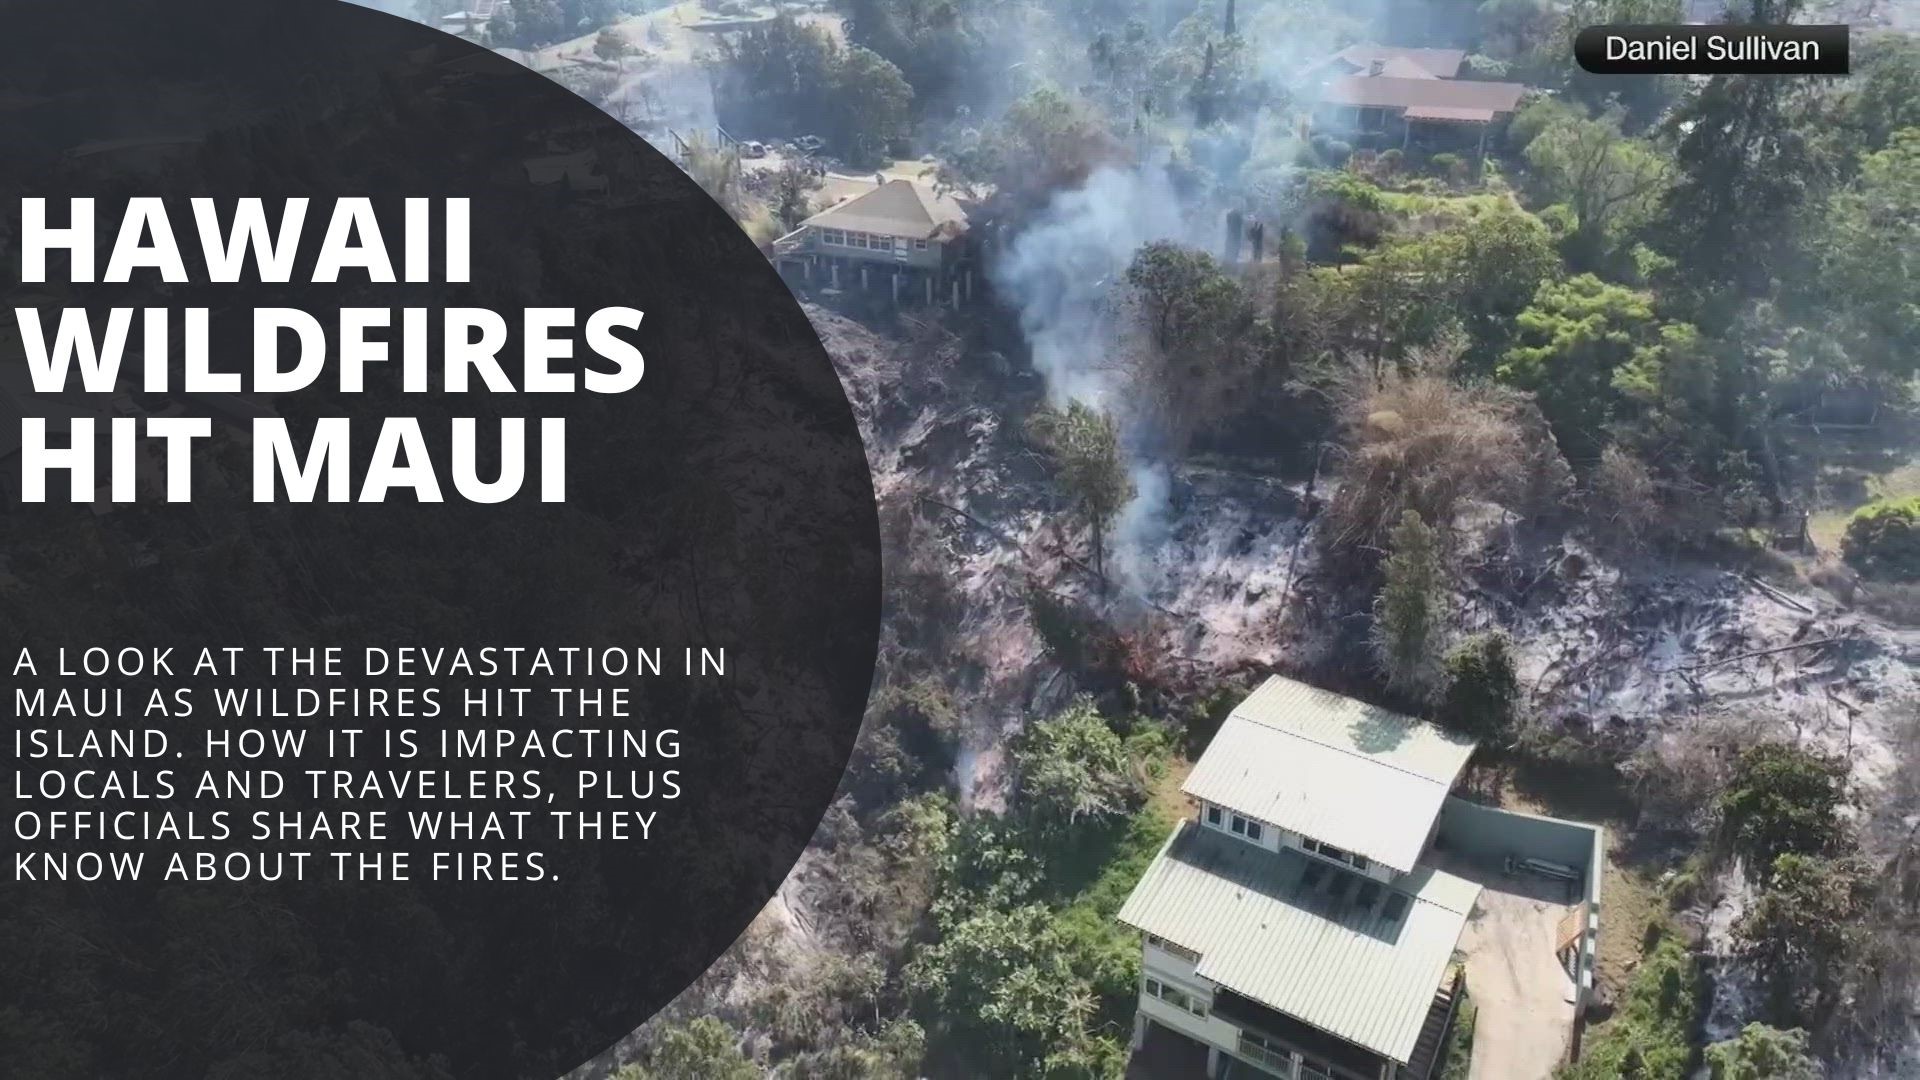 In the News Now takes a look at the devastating wildfires in Hawaii.